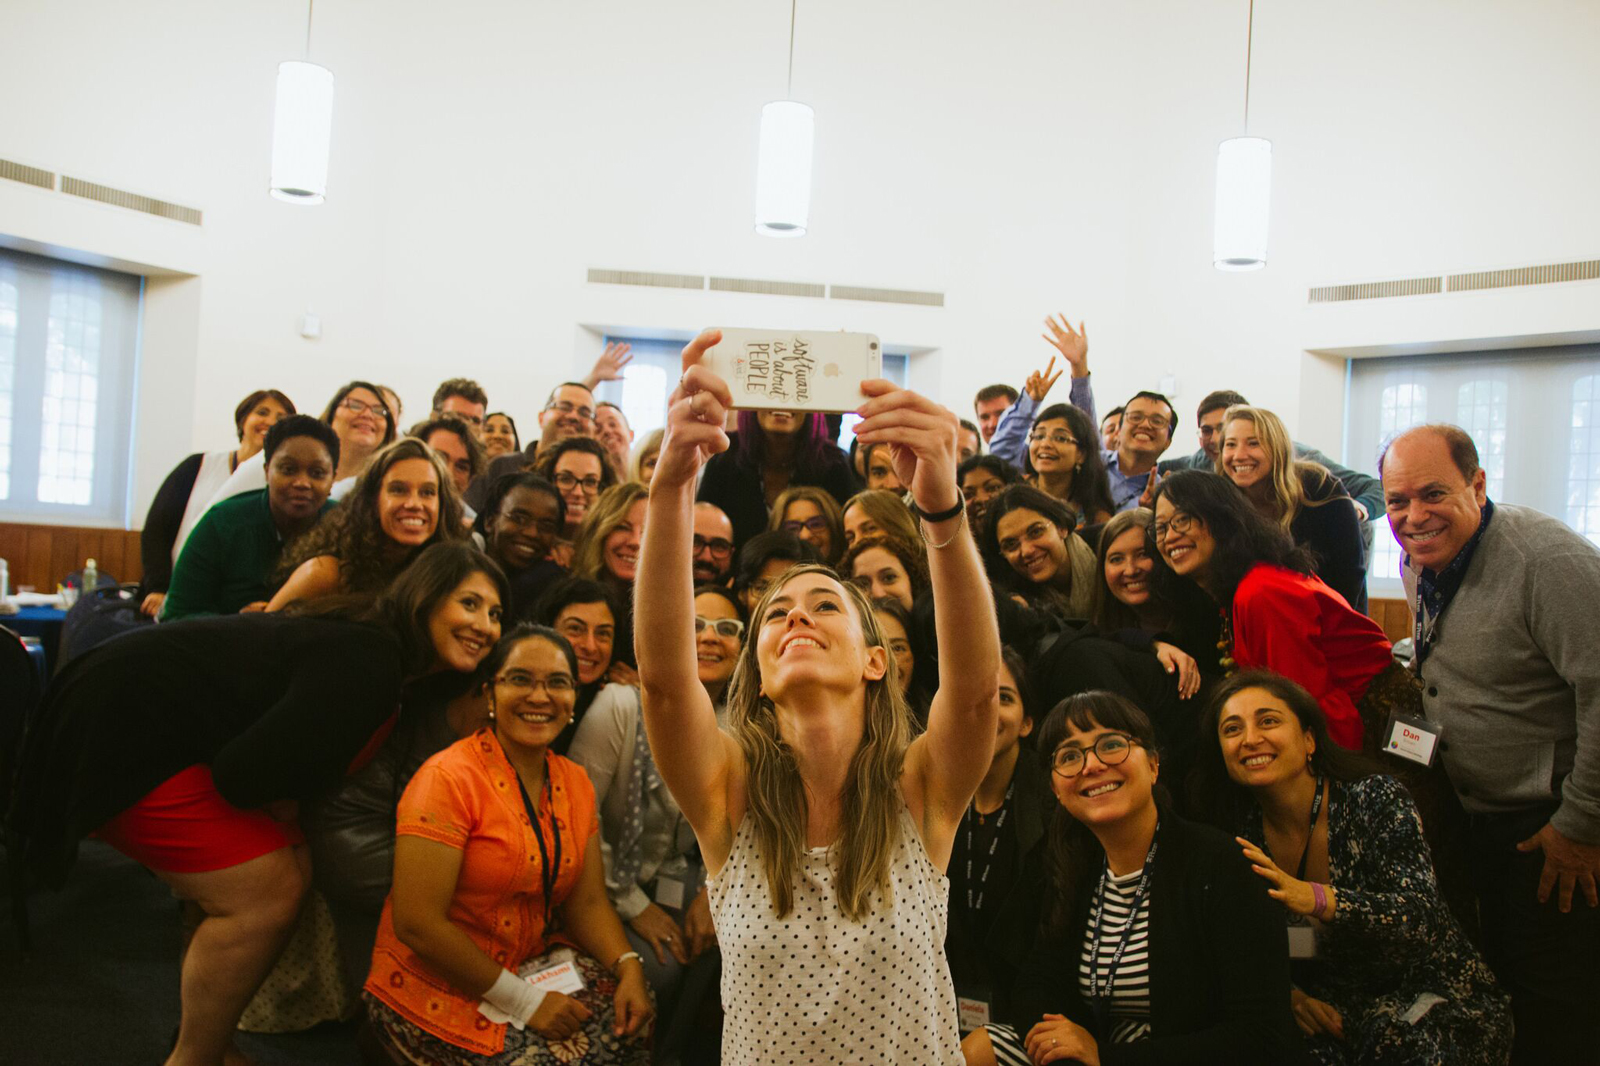 Sarah taking a selfie with a group of enthusiastic workshop attendees.